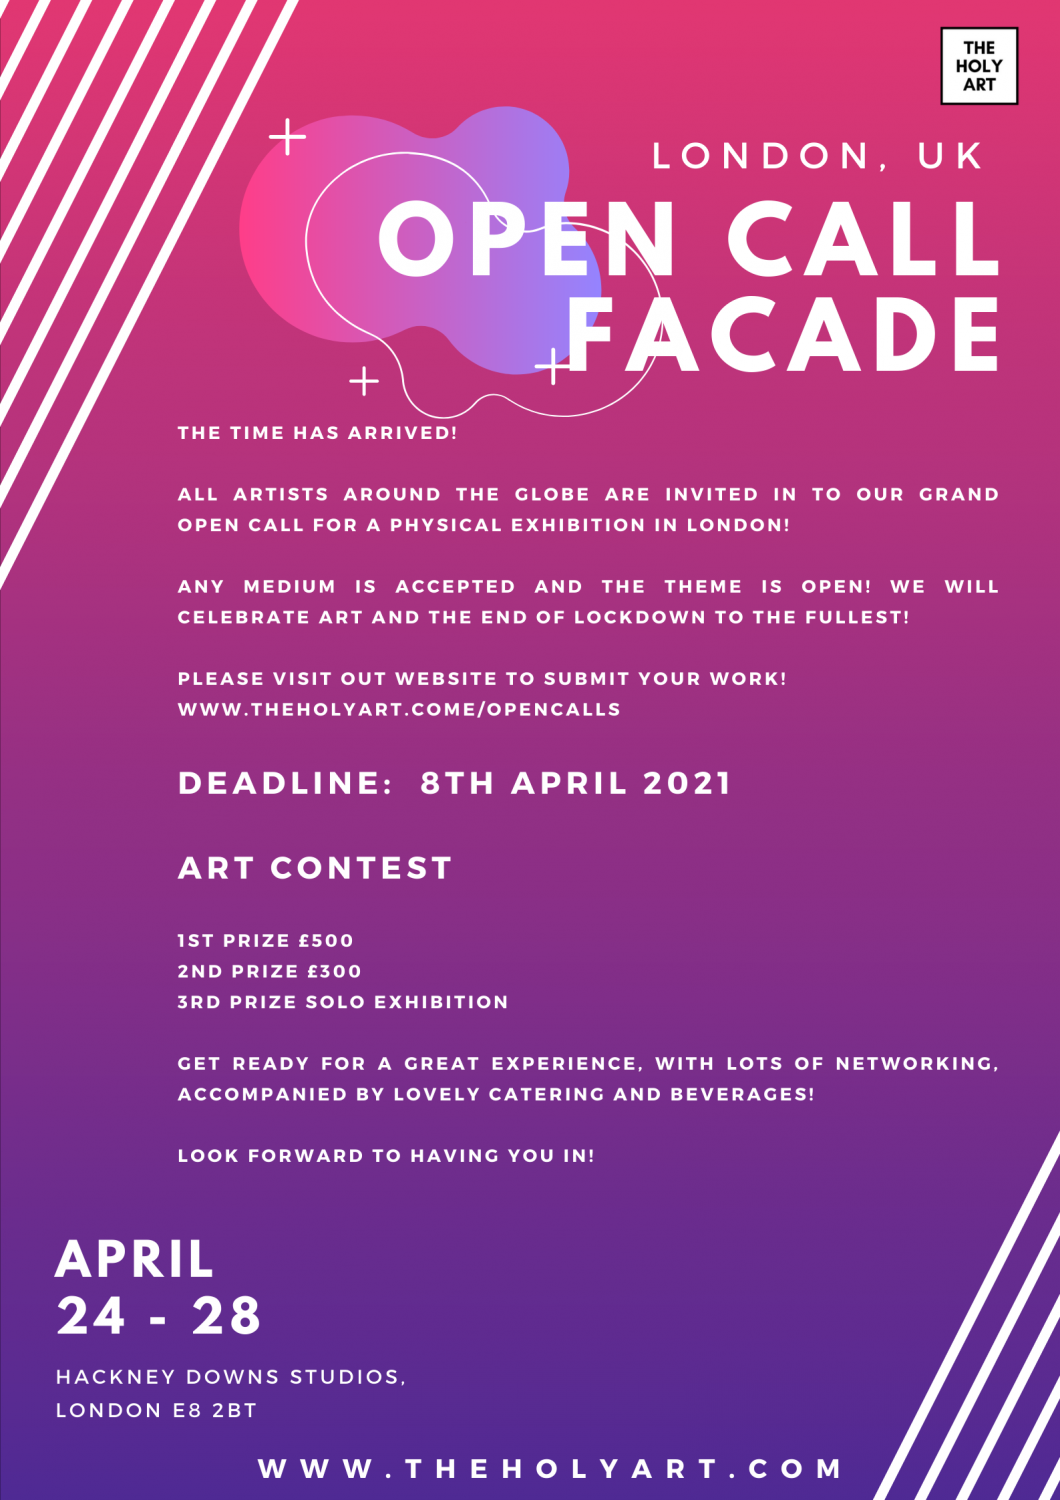 Call for Artists OPEN CALL FOR ARTISTS FACADE London